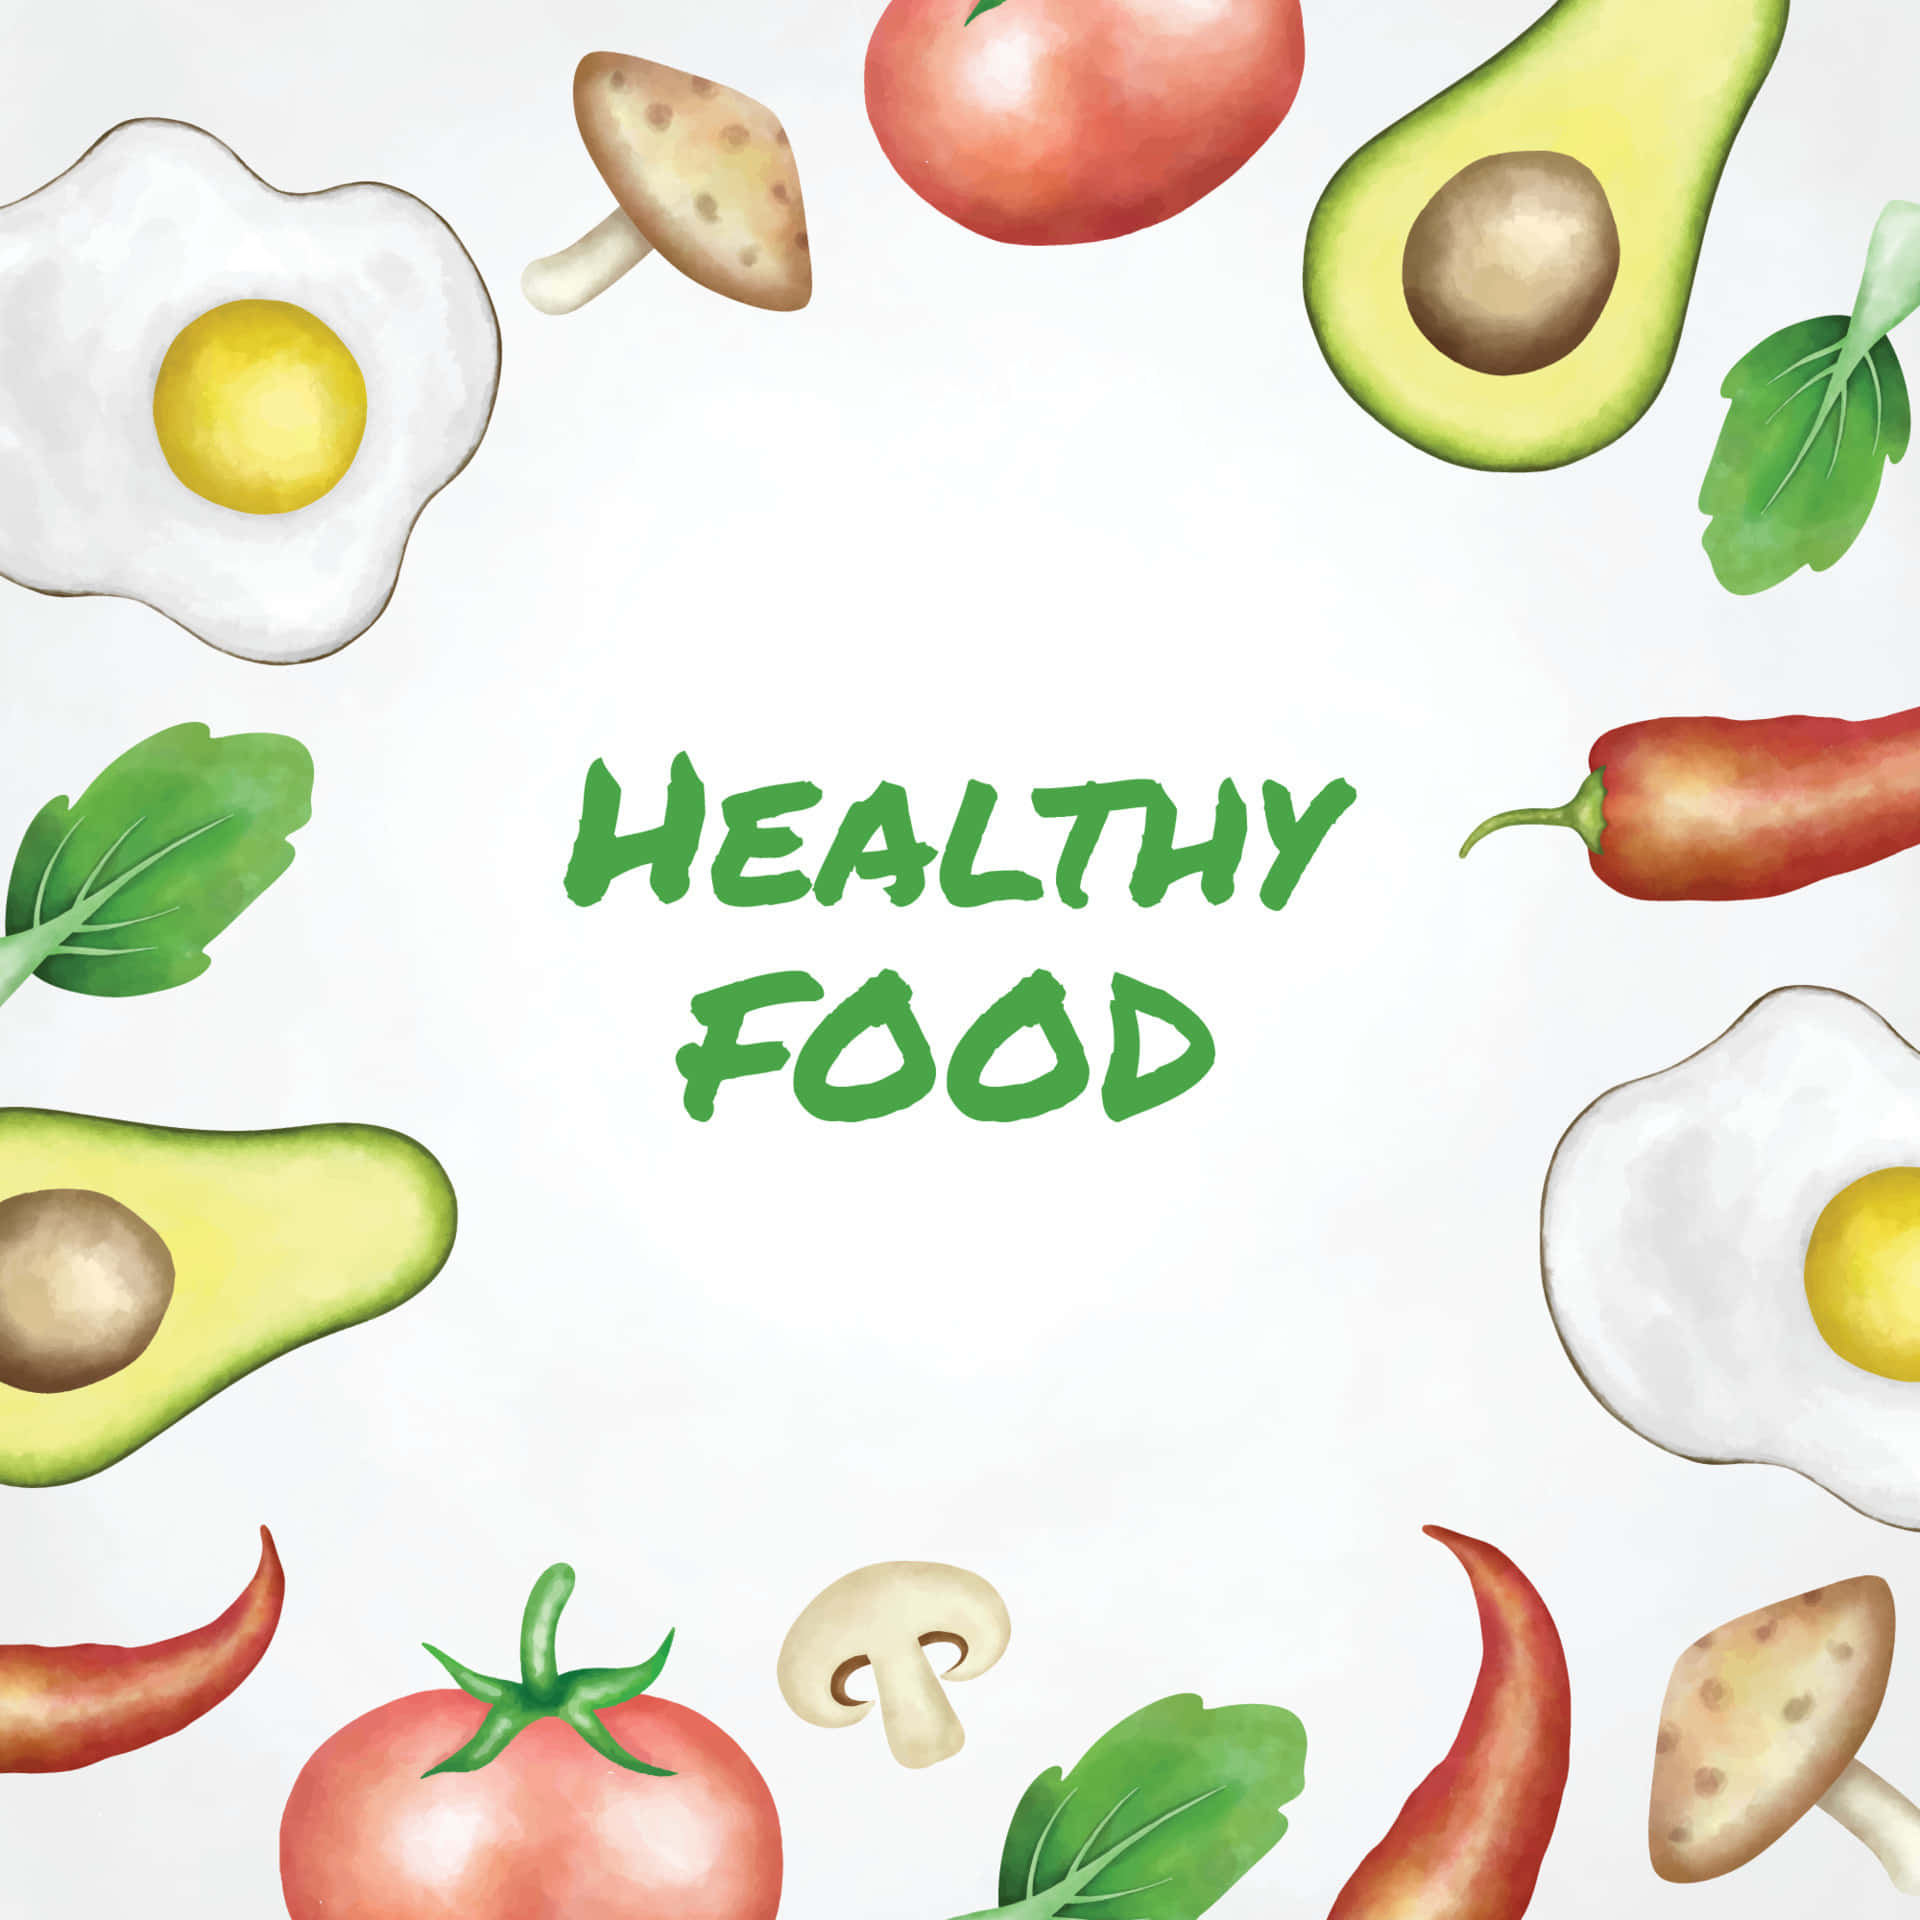 Healthy Food Illustration With Avocado, Tomatoes, Eggs And Mushrooms